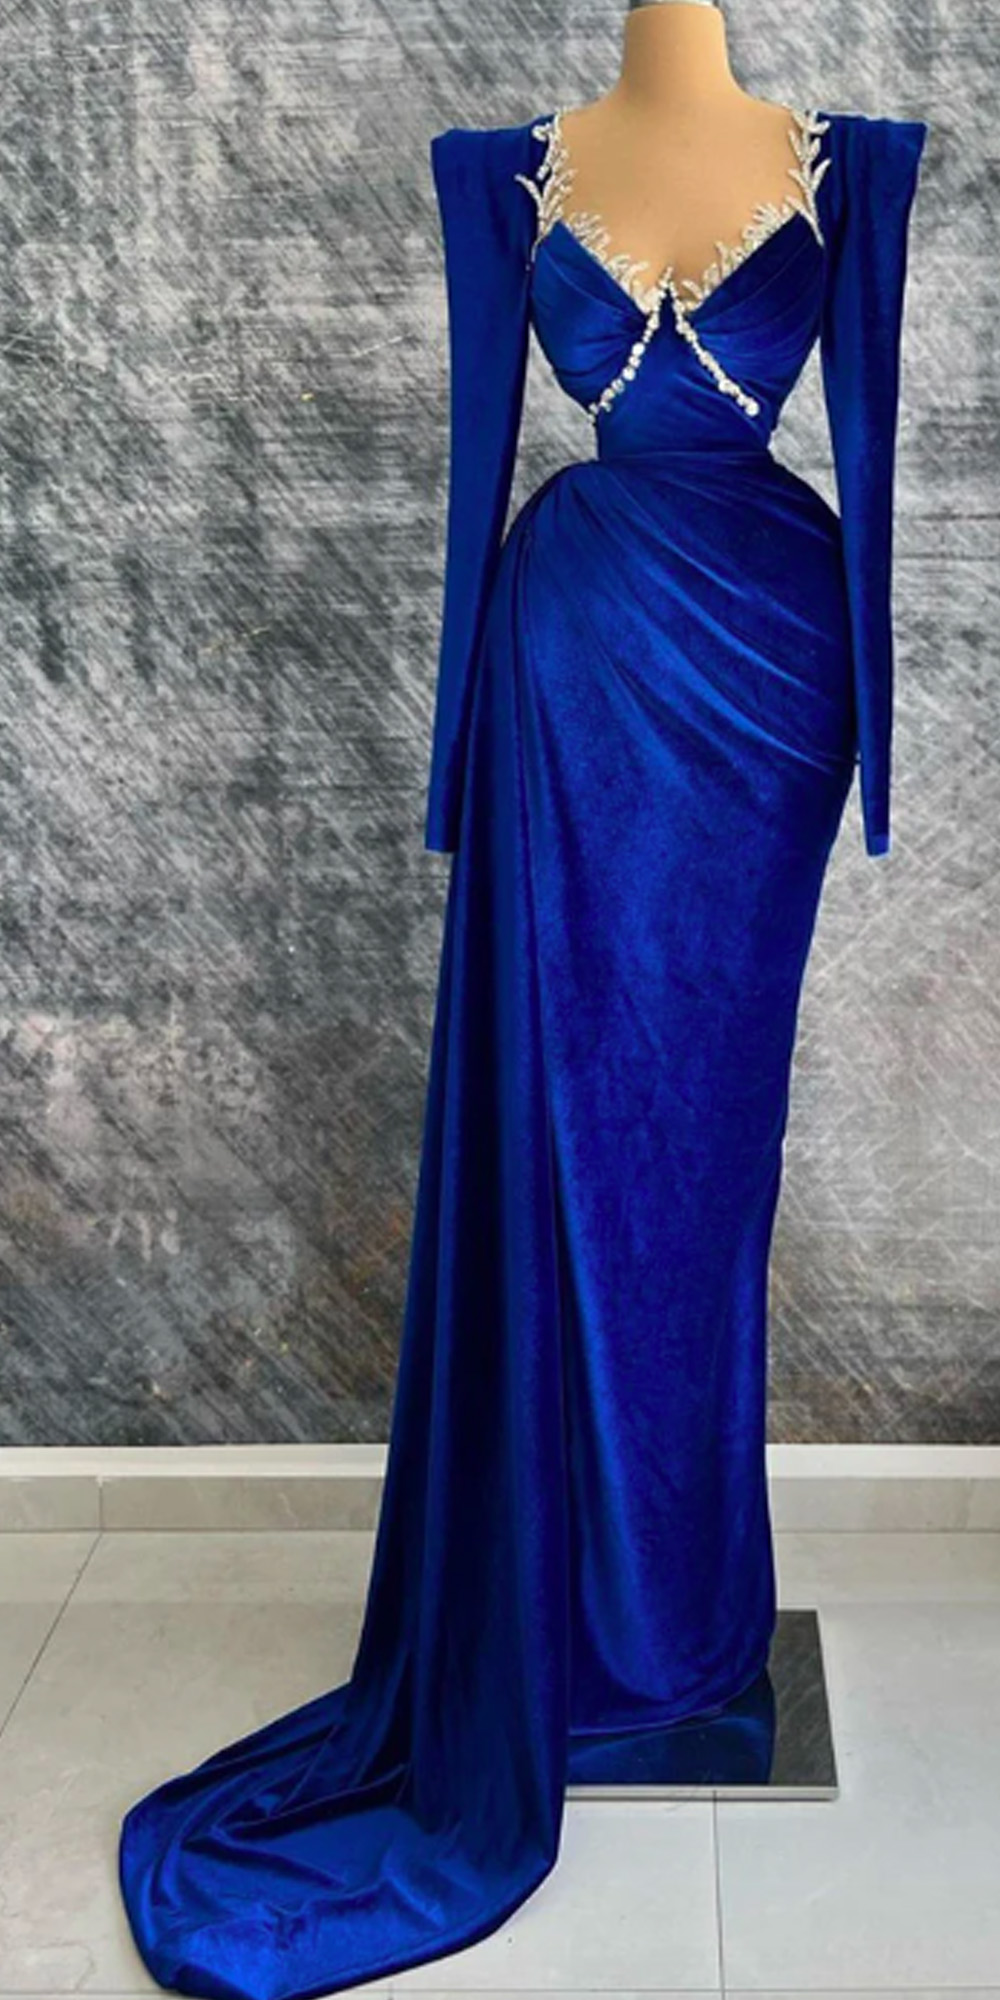 Ocean Blue Formal Evening Dresses Cap Sleeves Beaded V-neck Pleated Prom Dress Africa Arabia Bride Celebrity Party Gowns